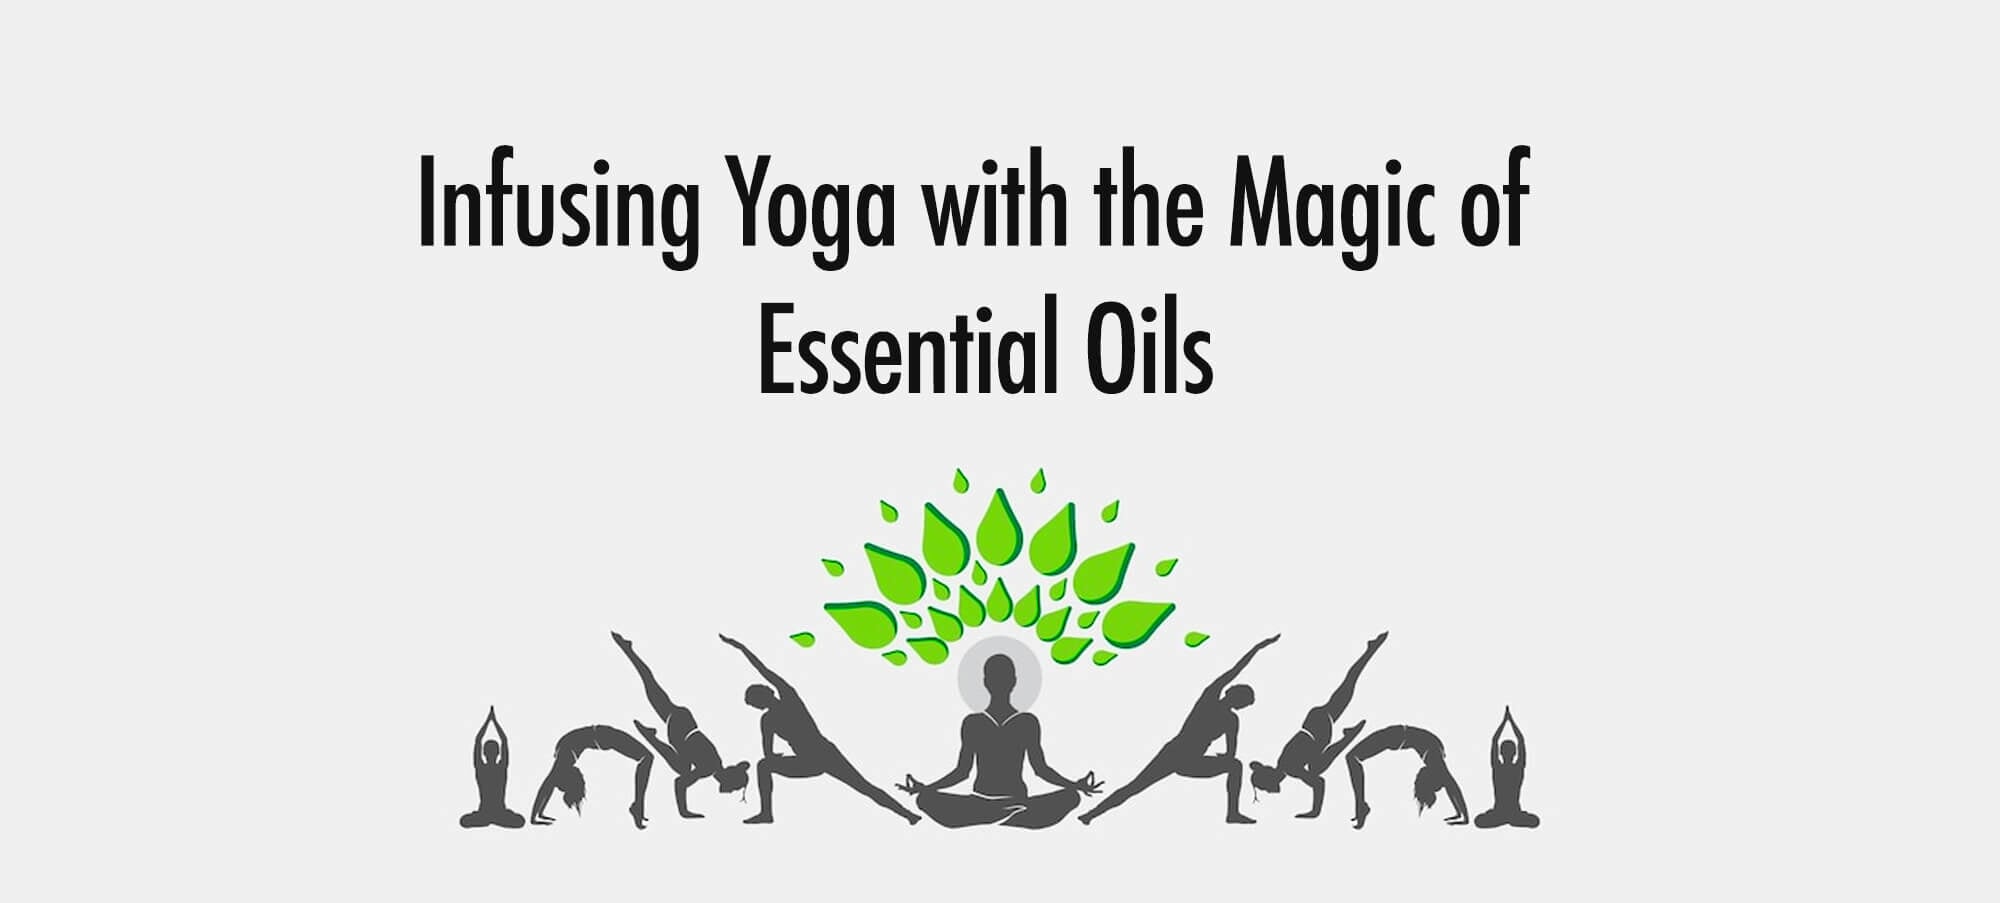 Ways to revamp Yoga with the magic of Essential oils